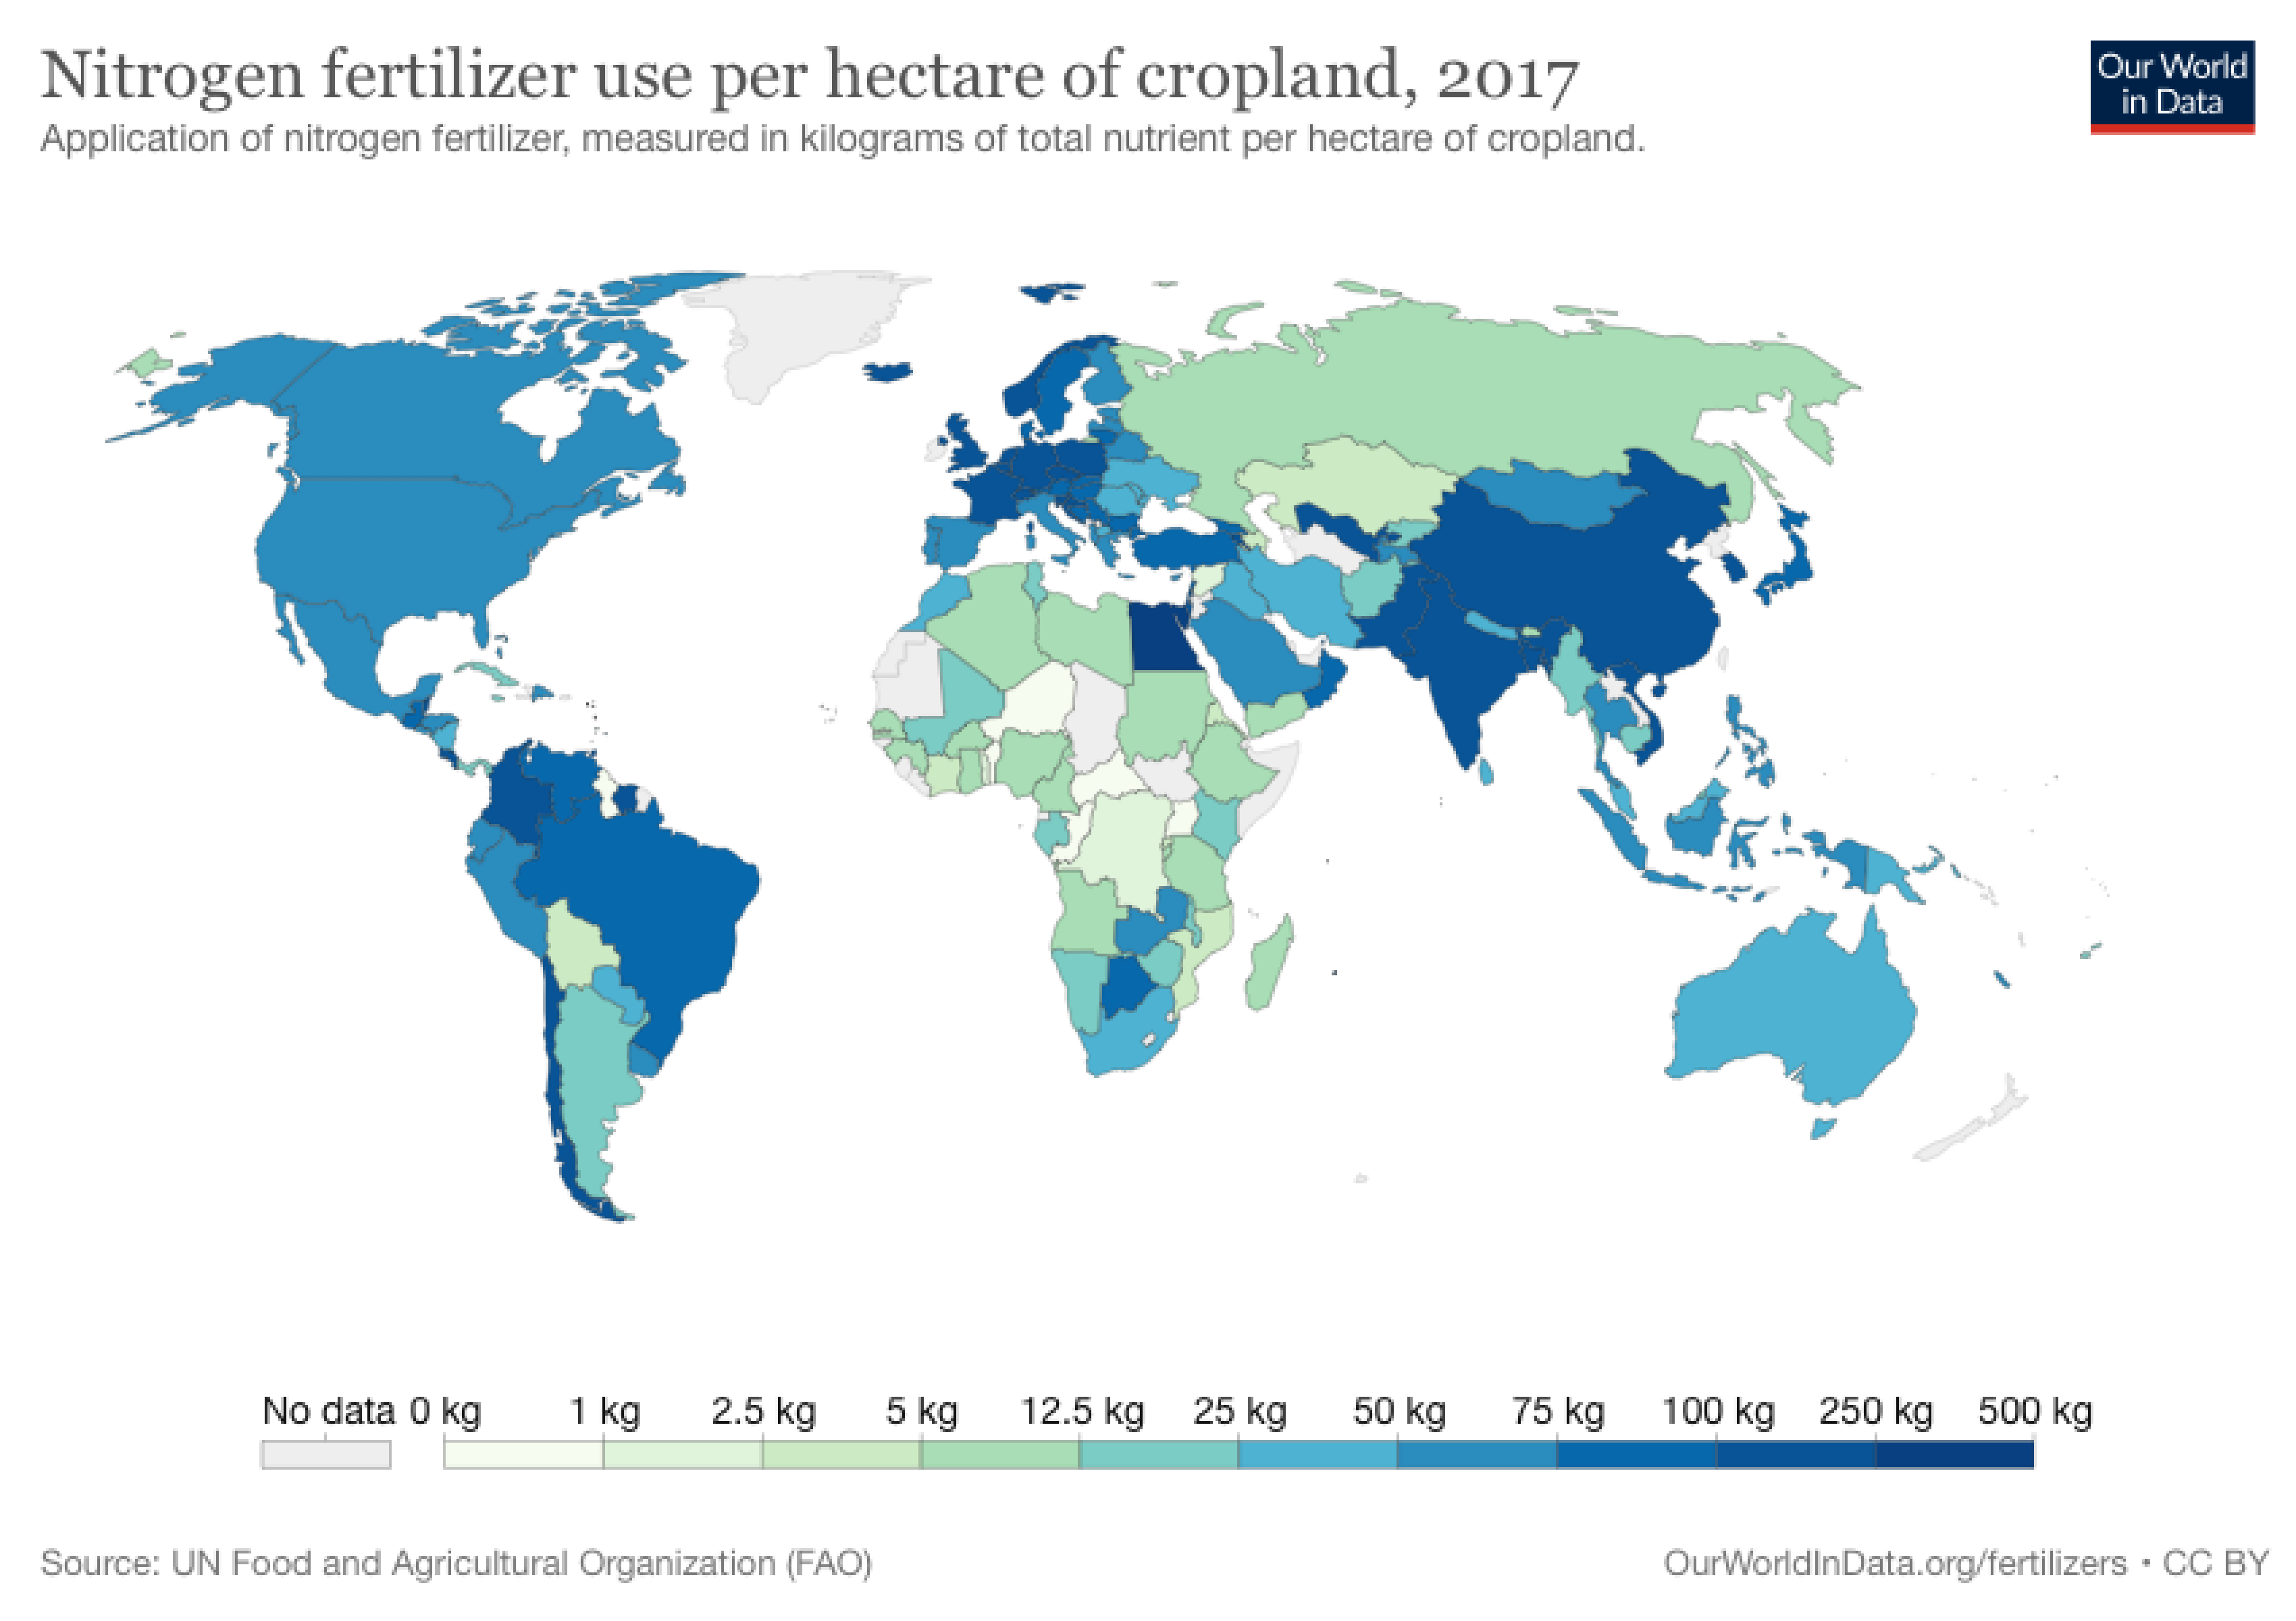 Image from Our World in Data / fertilizers, showing the nitrogen fertilizer use per hectare worldwide.